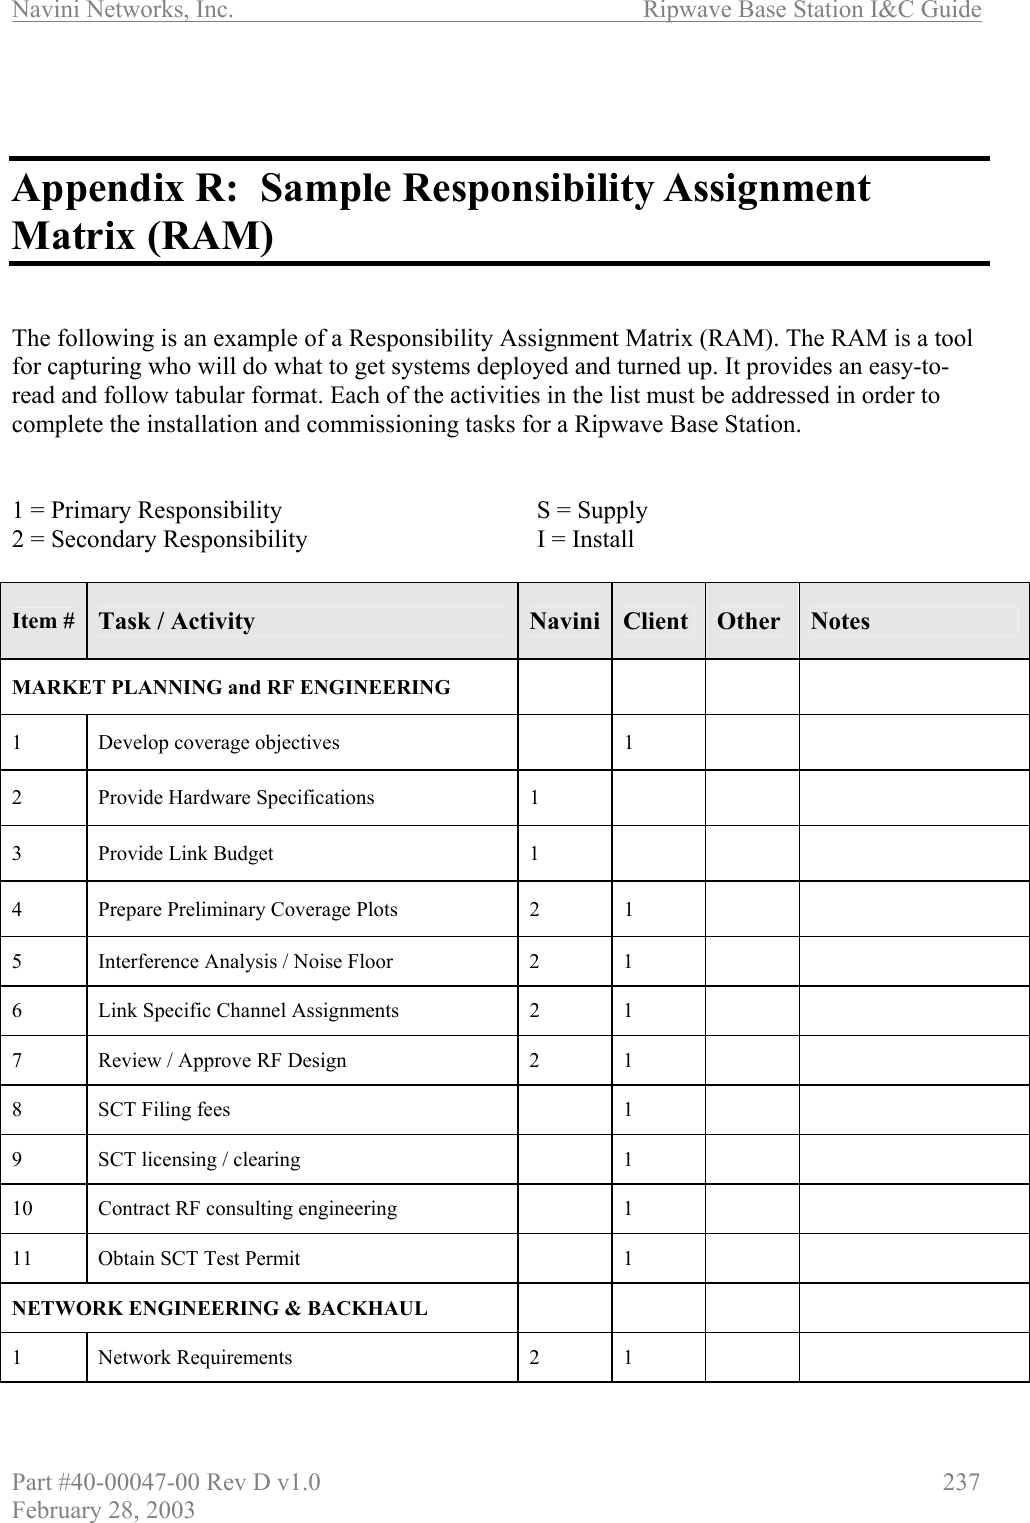 Navini Networks, Inc.                          Ripwave Base Station I&amp;C Guide Part #40-00047-00 Rev D v1.0                     237 February 28, 2003    Appendix R:  Sample Responsibility Assignment Matrix (RAM)   The following is an example of a Responsibility Assignment Matrix (RAM). The RAM is a tool for capturing who will do what to get systems deployed and turned up. It provides an easy-to-read and follow tabular format. Each of the activities in the list must be addressed in order to complete the installation and commissioning tasks for a Ripwave Base Station.   1 = Primary Responsibility        S = Supply 2 = Secondary Responsibility       I = Install  Item # Task / Activity  Navini  Client  Other  Notes MARKET PLANNING and RF ENGINEERING      1  Develop coverage objectives    1     2  Provide Hardware Specifications  1       3  Provide Link Budget  1       4  Prepare Preliminary Coverage Plots  2  1     5  Interference Analysis / Noise Floor  2  1     6  Link Specific Channel Assignments  2  1     7  Review / Approve RF Design  2  1     8  SCT Filing fees    1     9  SCT licensing / clearing    1     10  Contract RF consulting engineering    1     11  Obtain SCT Test Permit    1     NETWORK ENGINEERING &amp; BACKHAUL      1 Network Requirements  2 1    